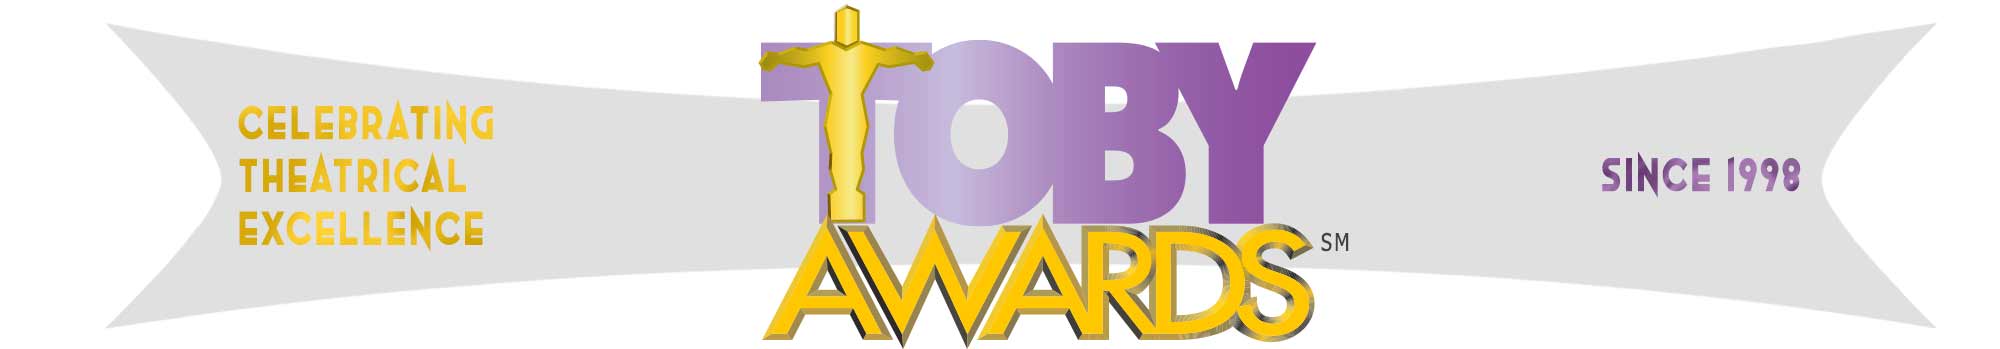 The Toby Awards since 1998. Celebrating Theatre